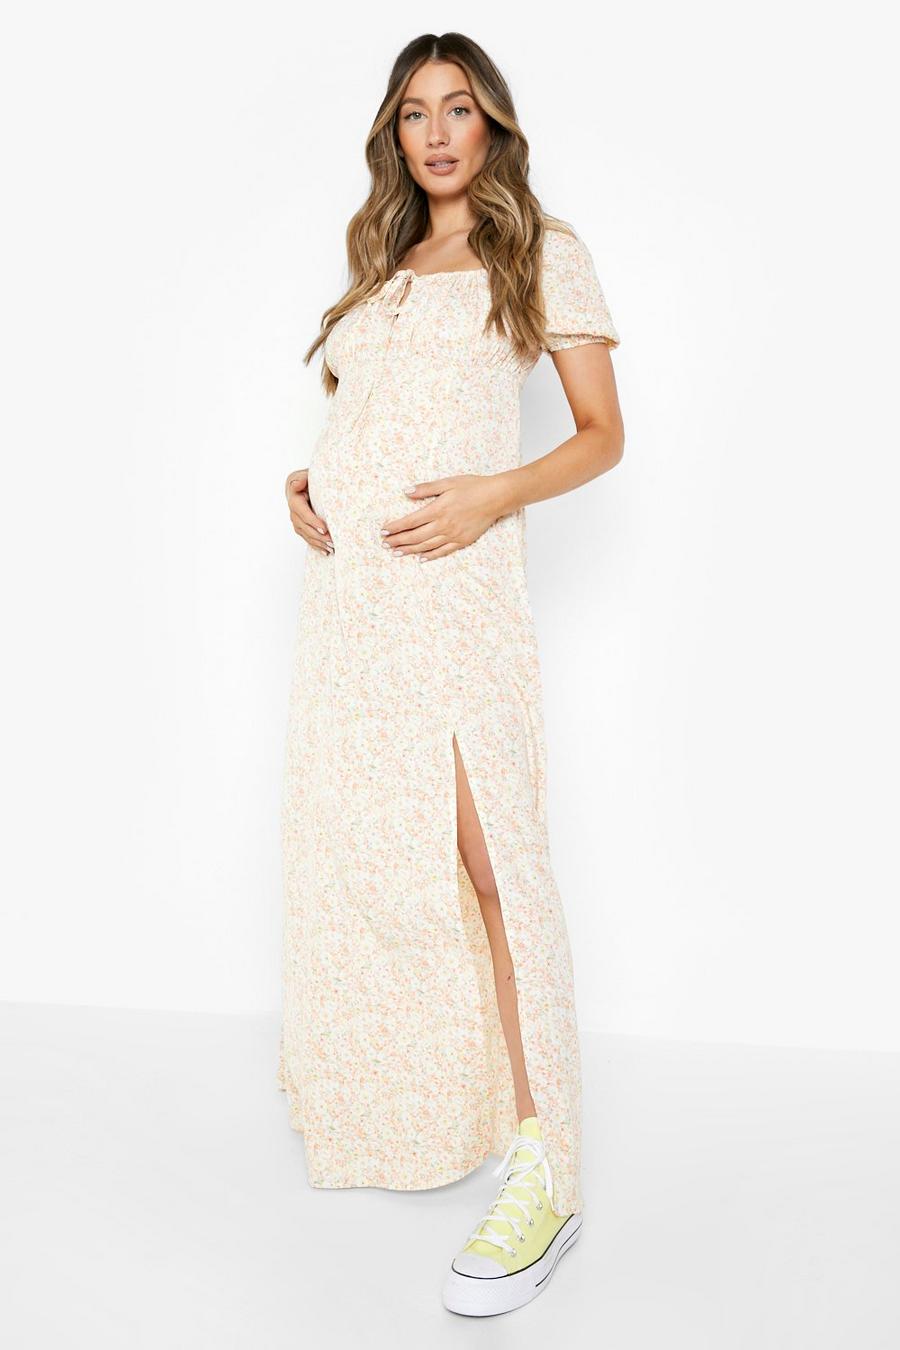 Coral pink Maternity Floral Tie Front Maxi Dress